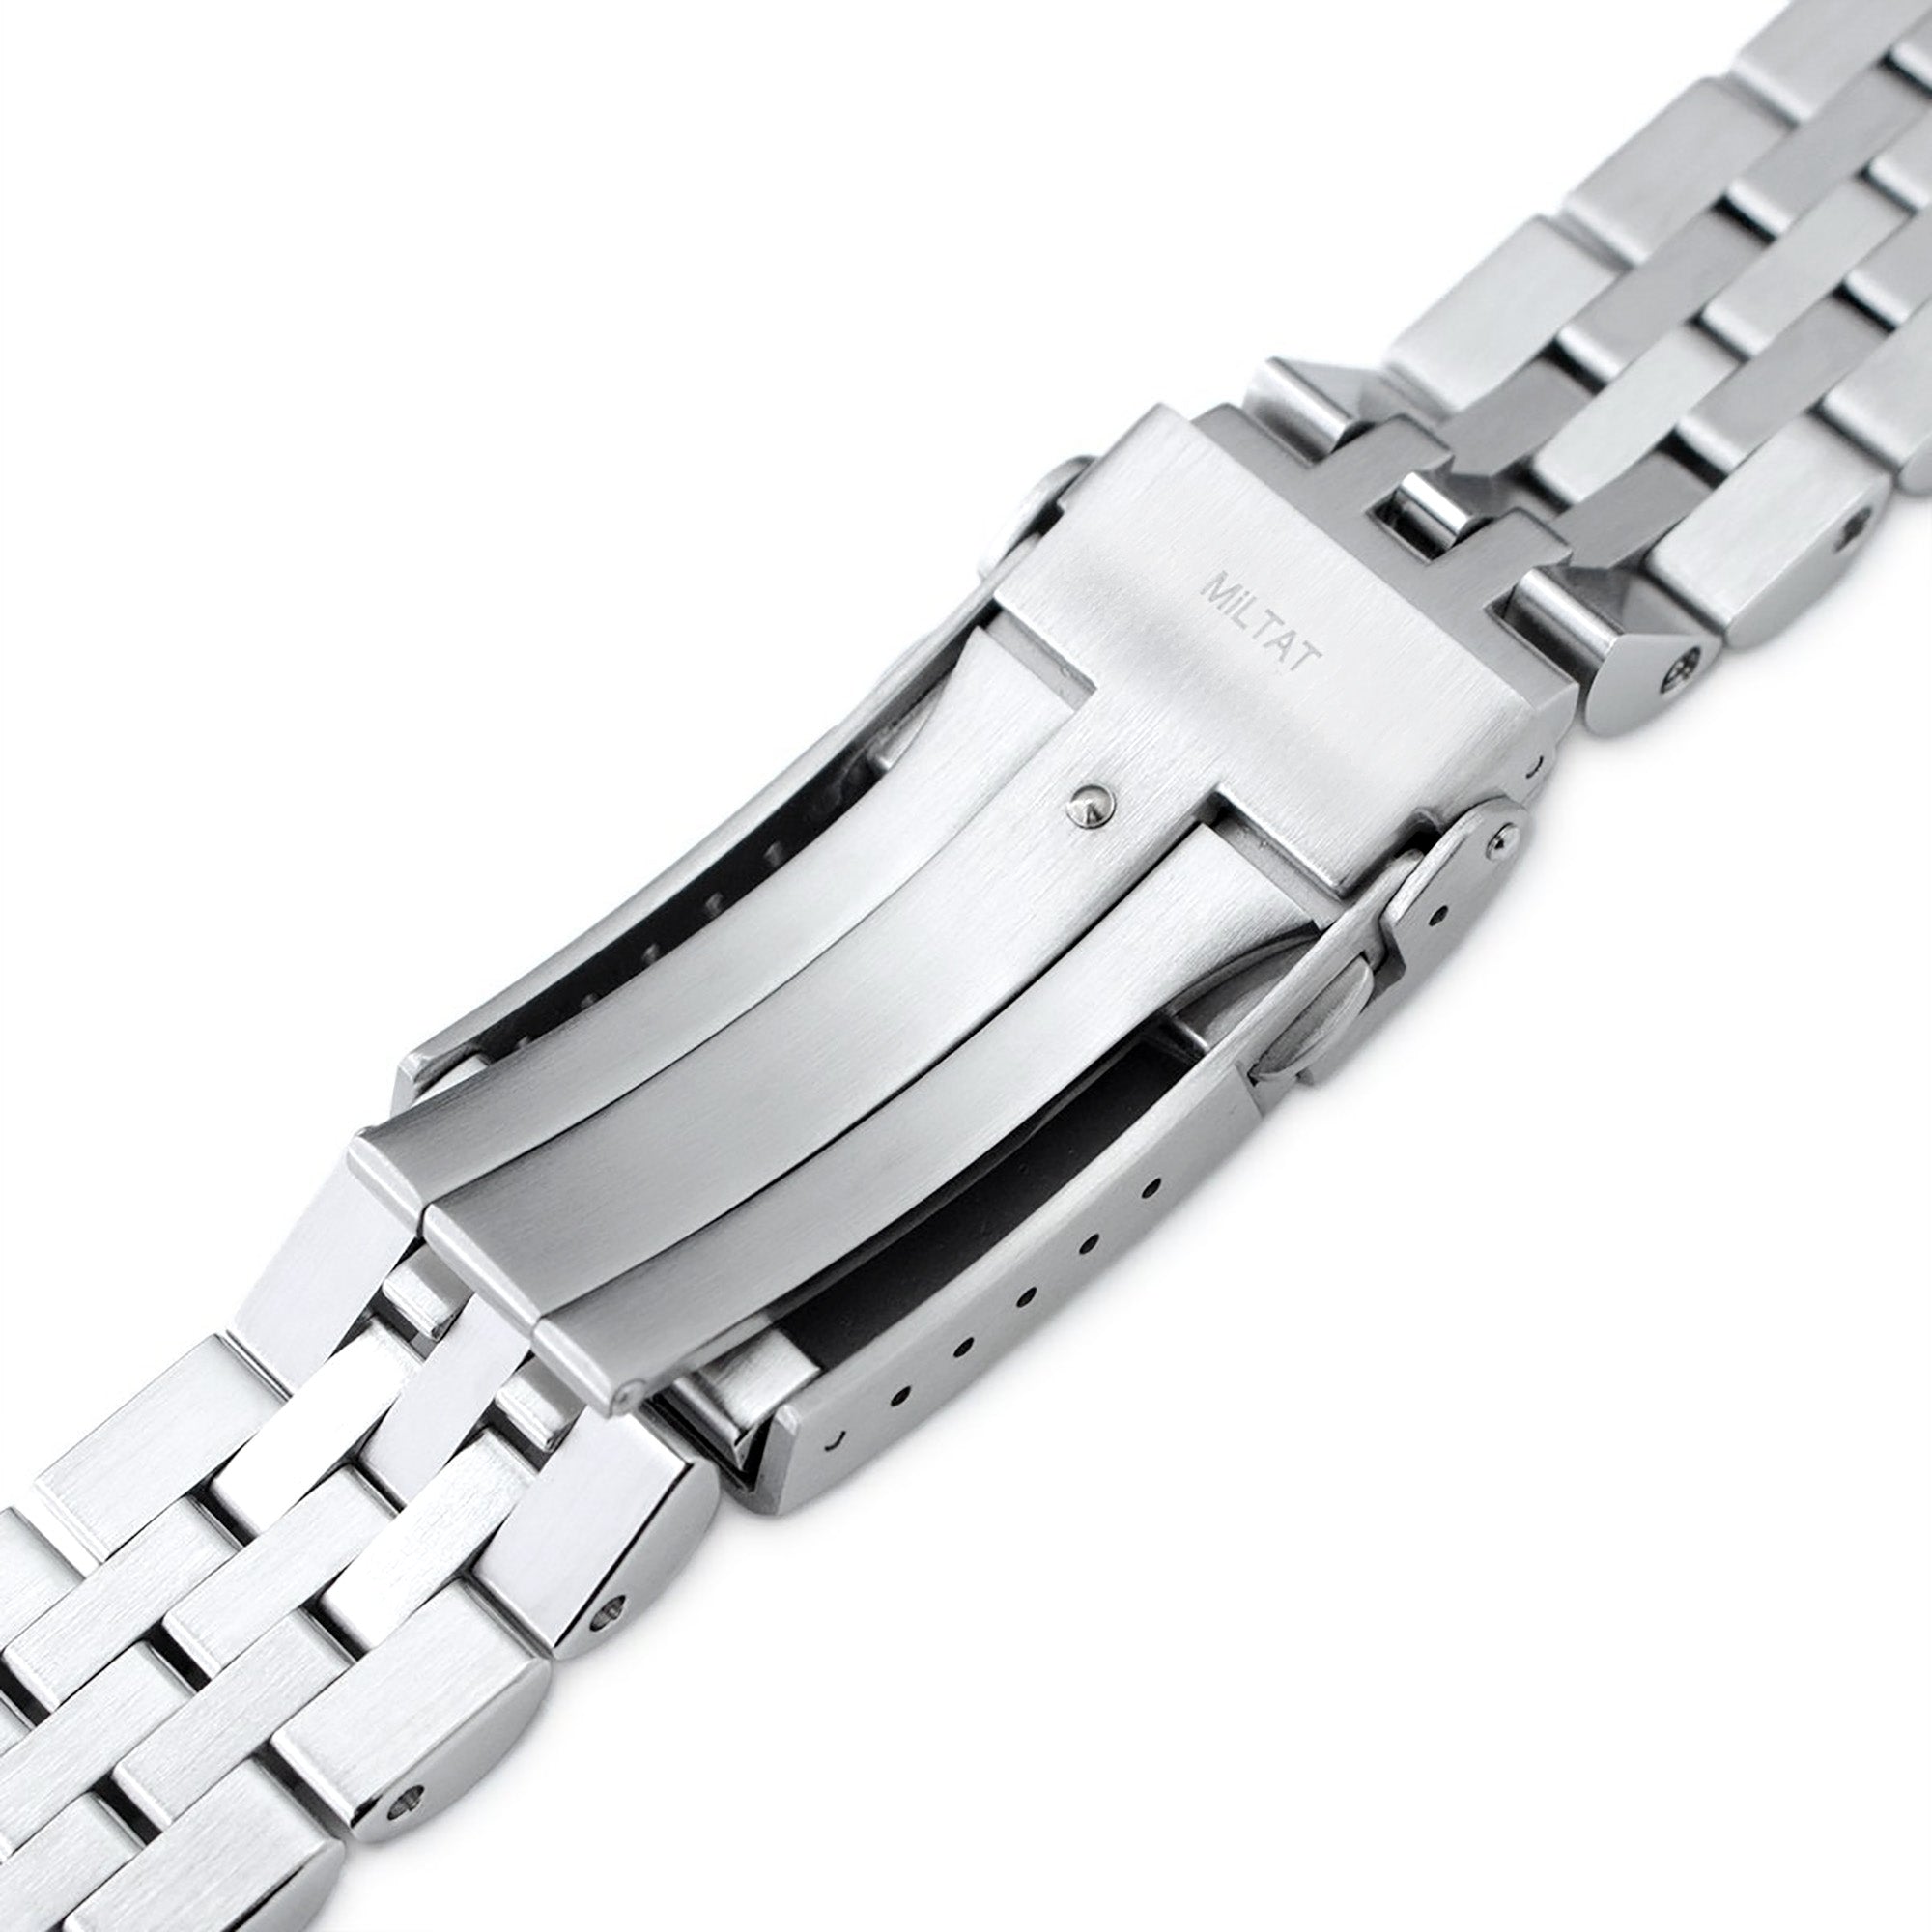 Beyond the Vintage Angus Louis Watch Bracelet for RX SUB 1680 in Brushed V-Clasp Strapcode Watch Bands